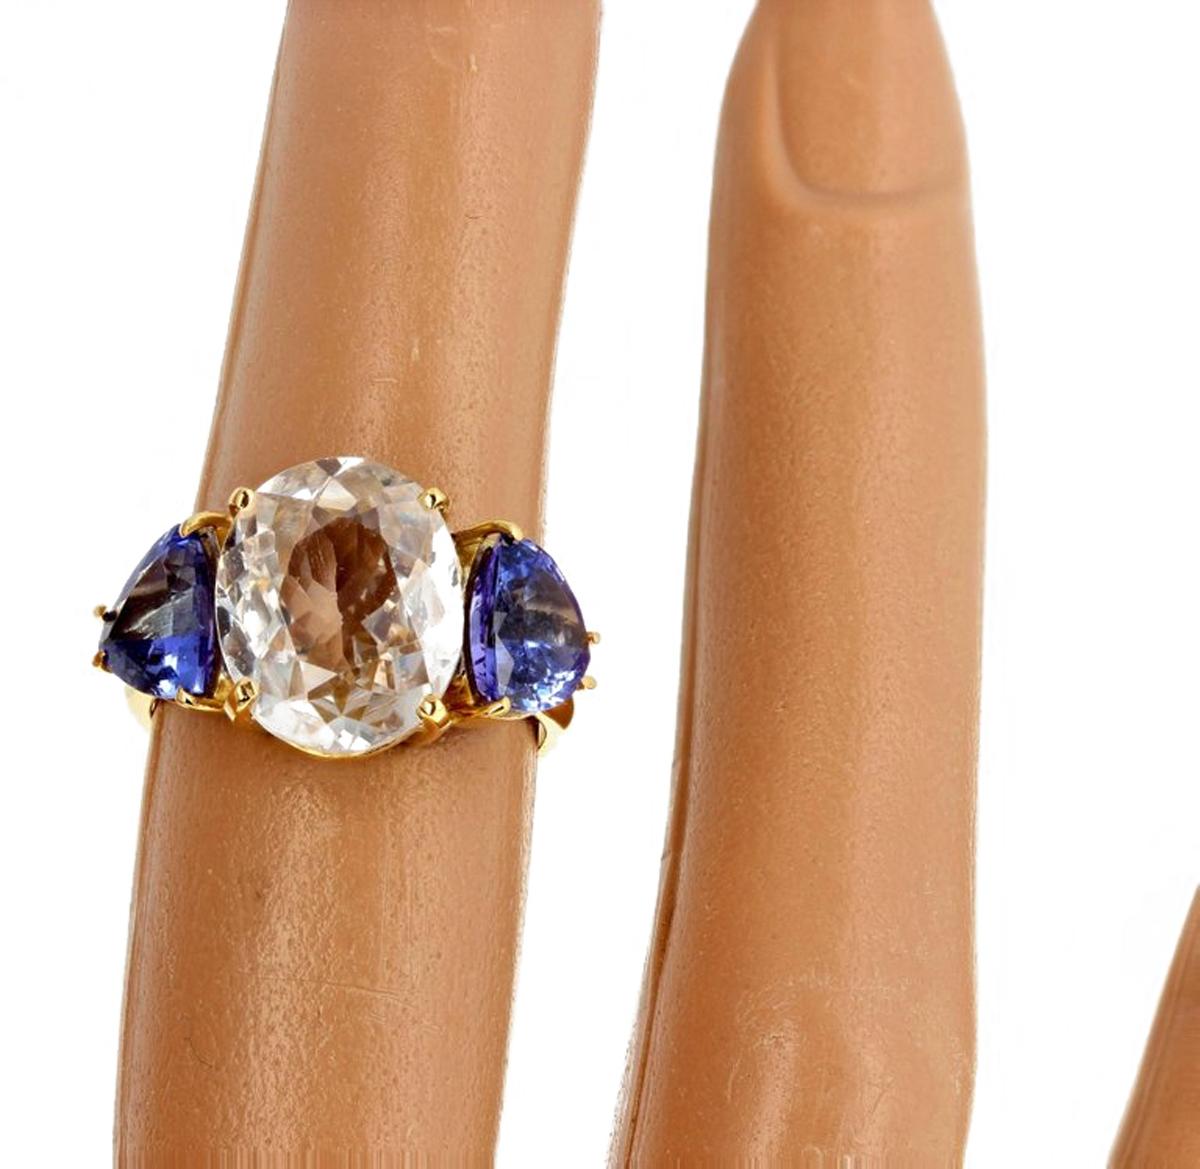 Mixed Cut AJD Natural Bright 5Ct Cambodian Zircon & Tanzanite 18Kt Gold Cocktail Ring For Sale